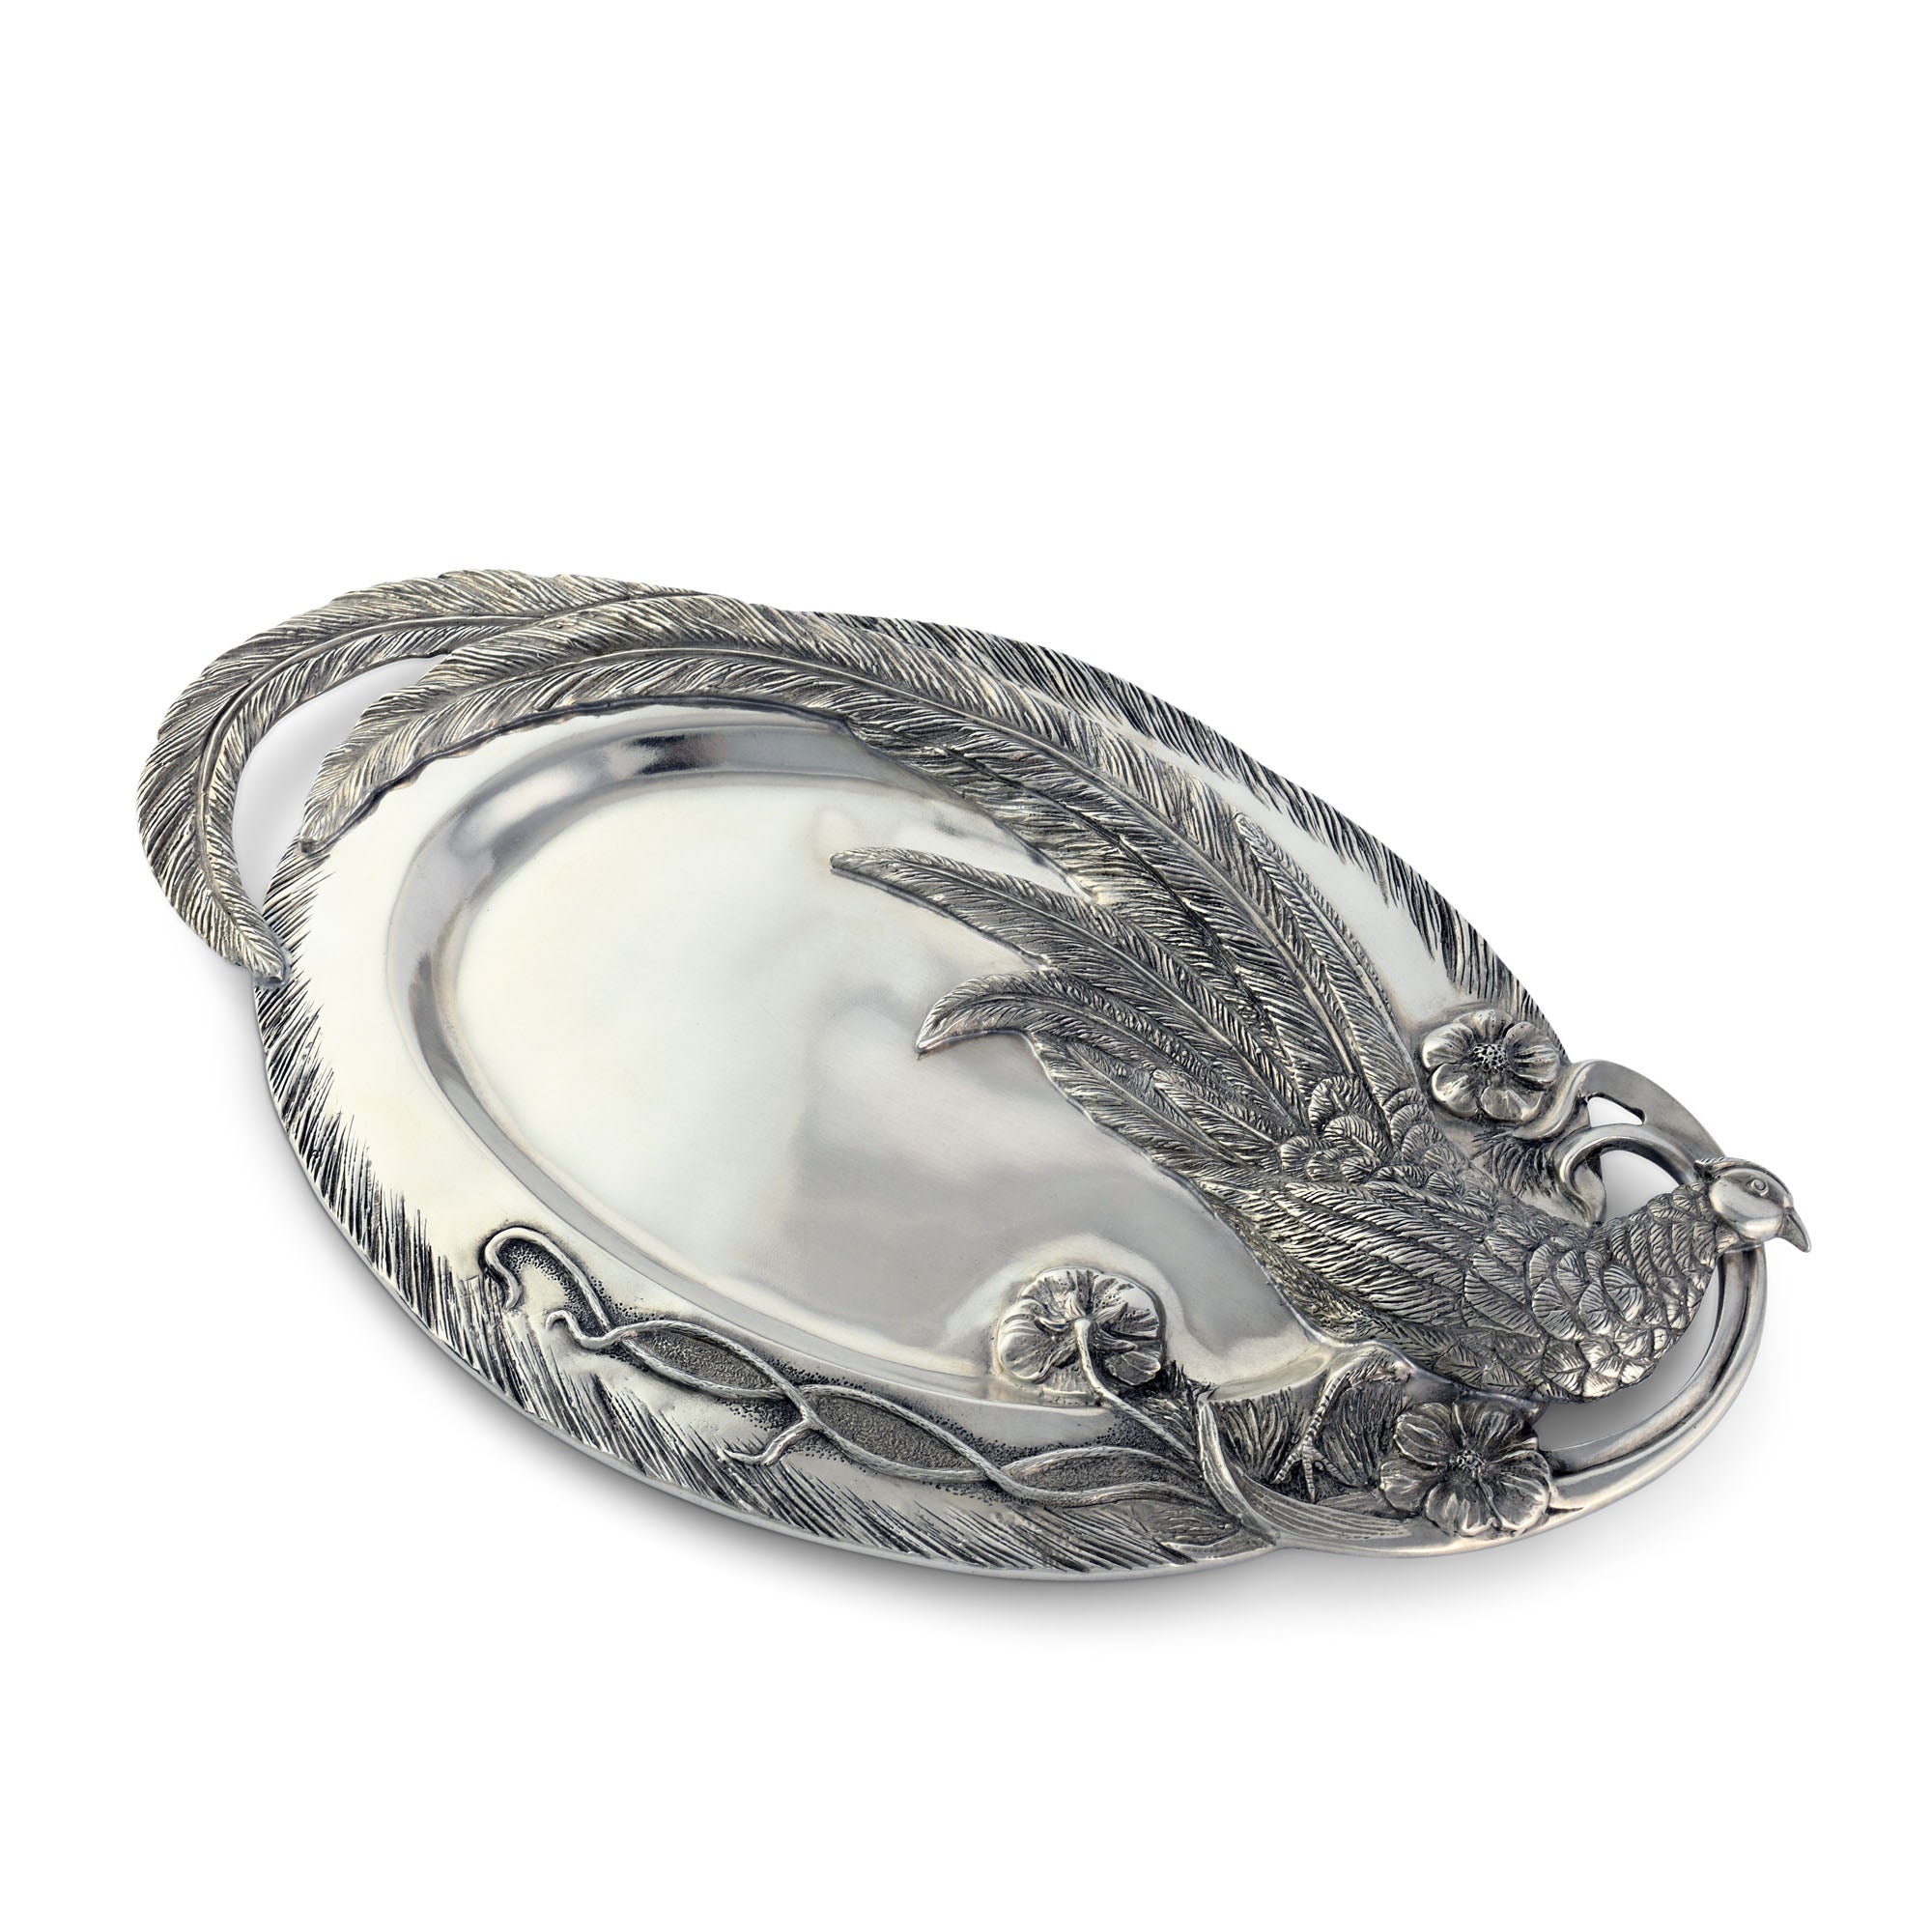 Vagabond House Pheasant Feather Oblong Tray Product Image